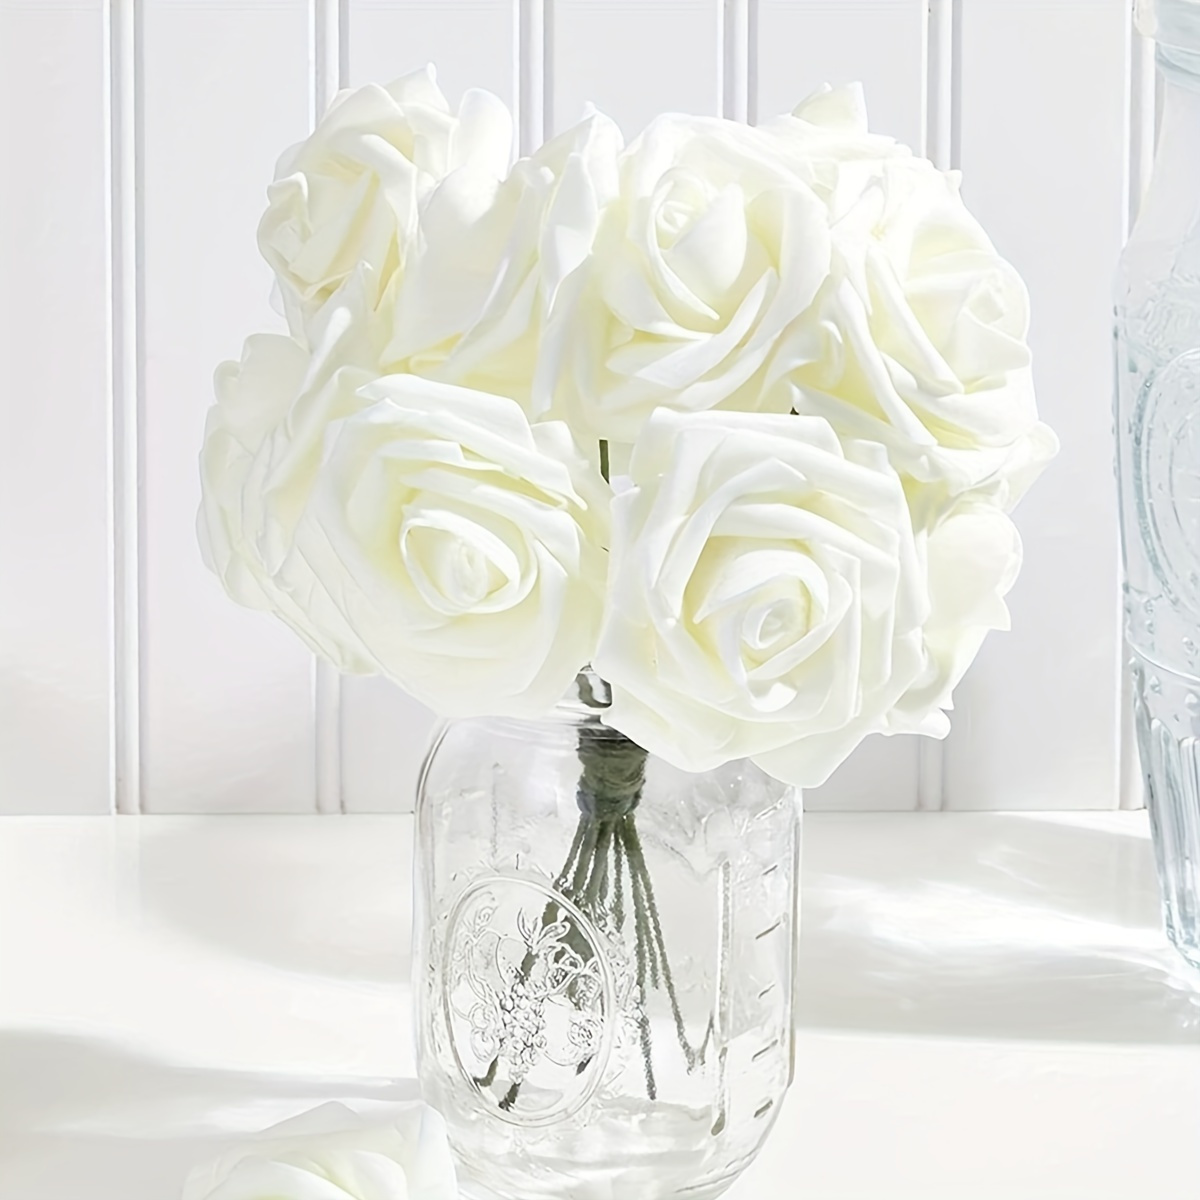 

12pcs Rose Artifiical Flower, Milky White Faux Rose Flower Bouquet, Suitable For Wedding Road Layout, Home Hotel Decoration, Winter Spring Xmas Christams New Year Home Table Decoration